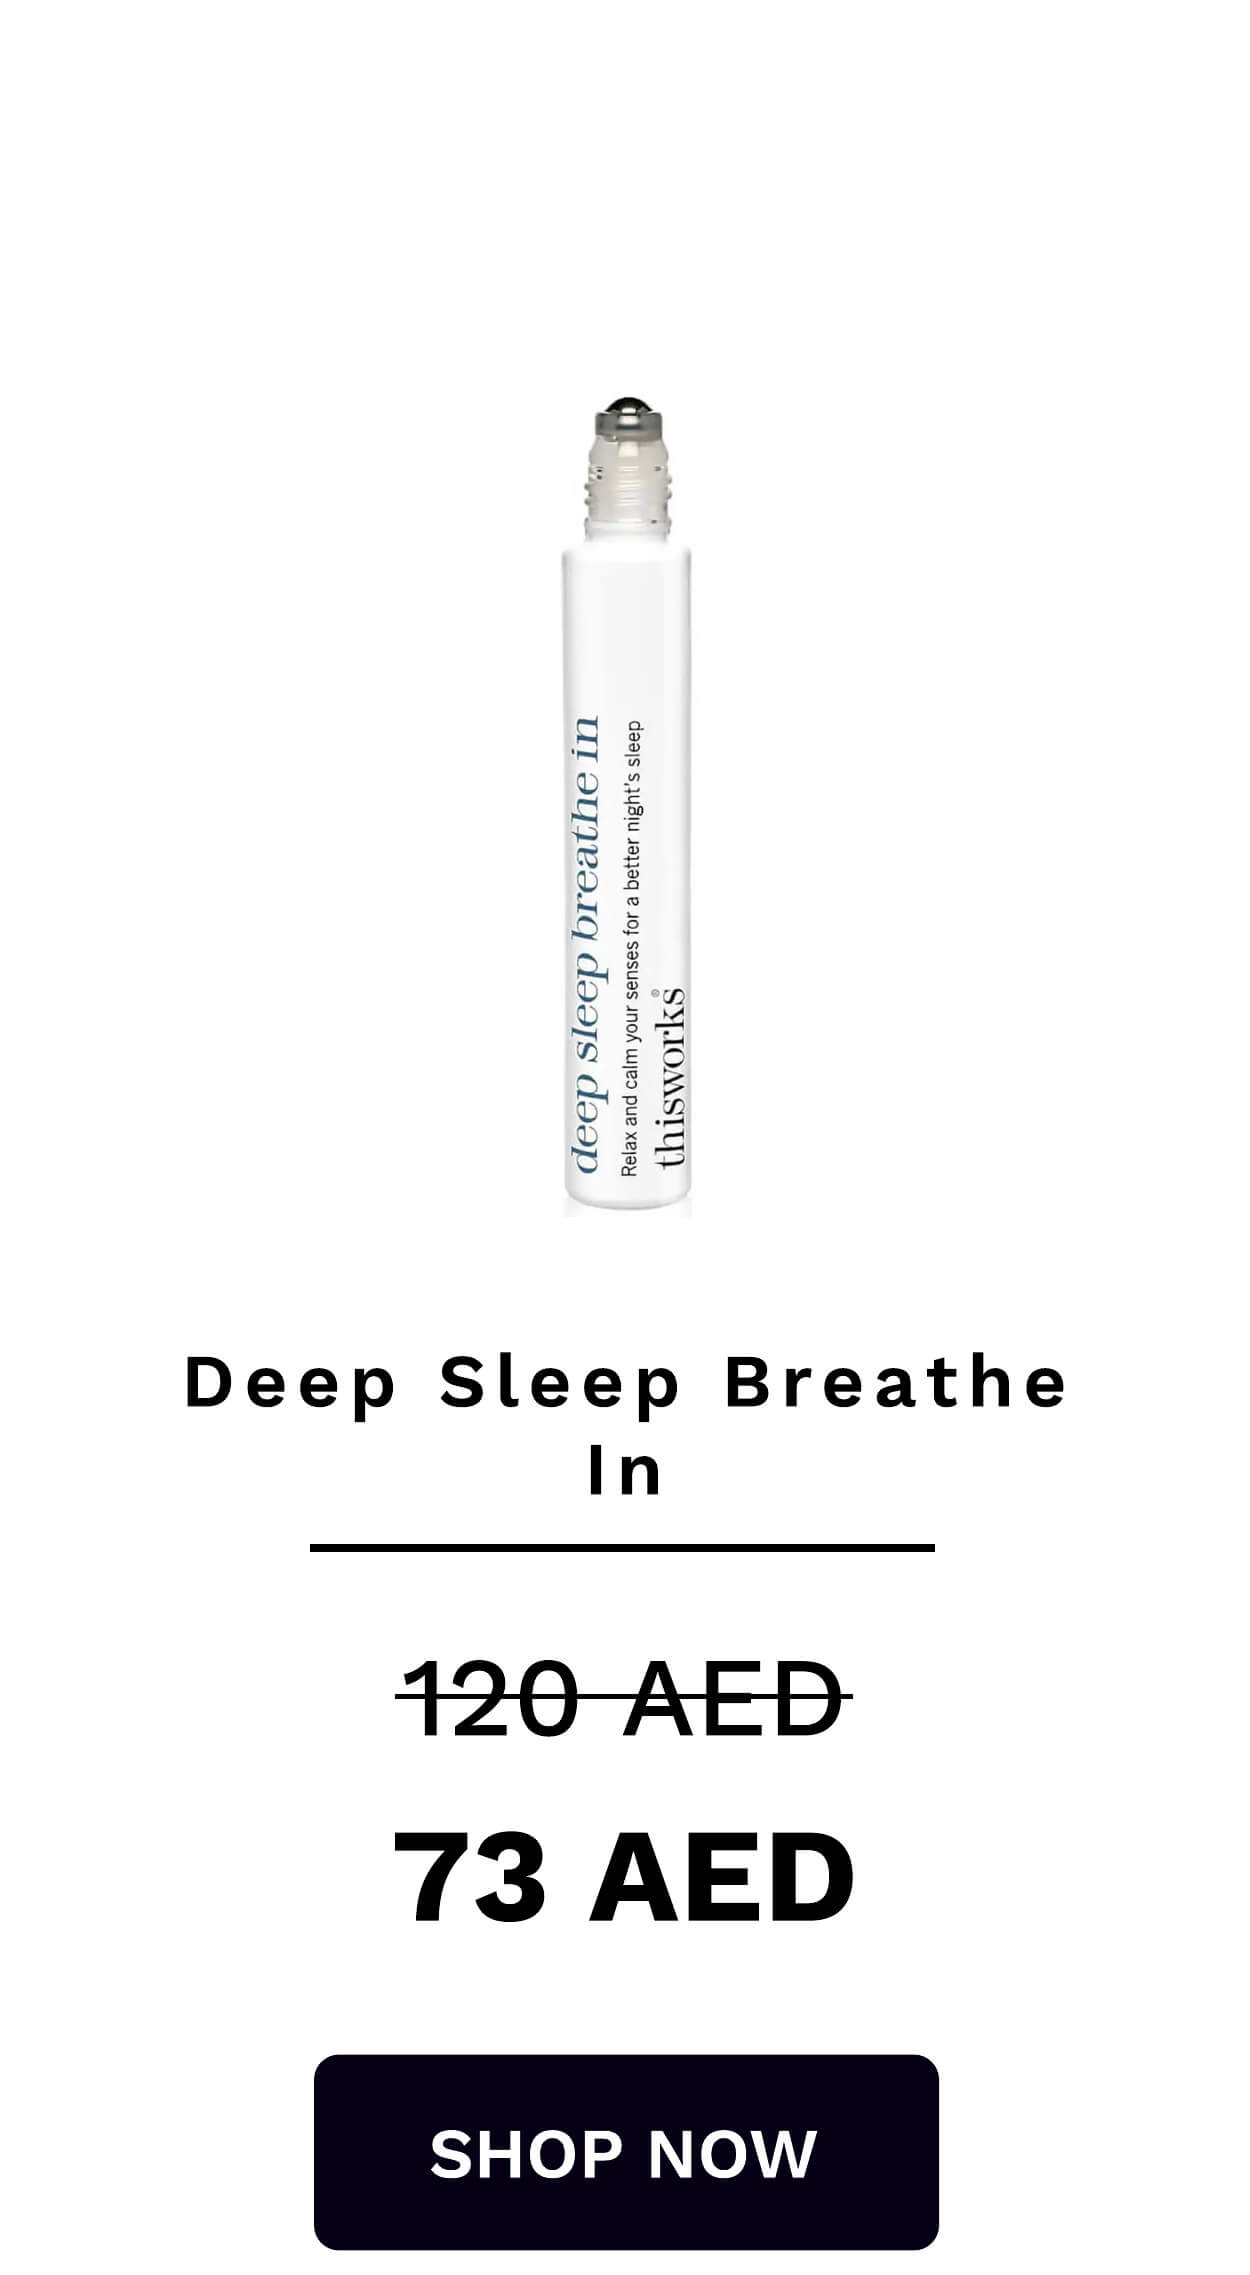 deep sleep breathe in Relax an ight" lax and calm your sen: thisworks Deep Sleep Breathe In 120-AED 73 AED SHOP NOW 